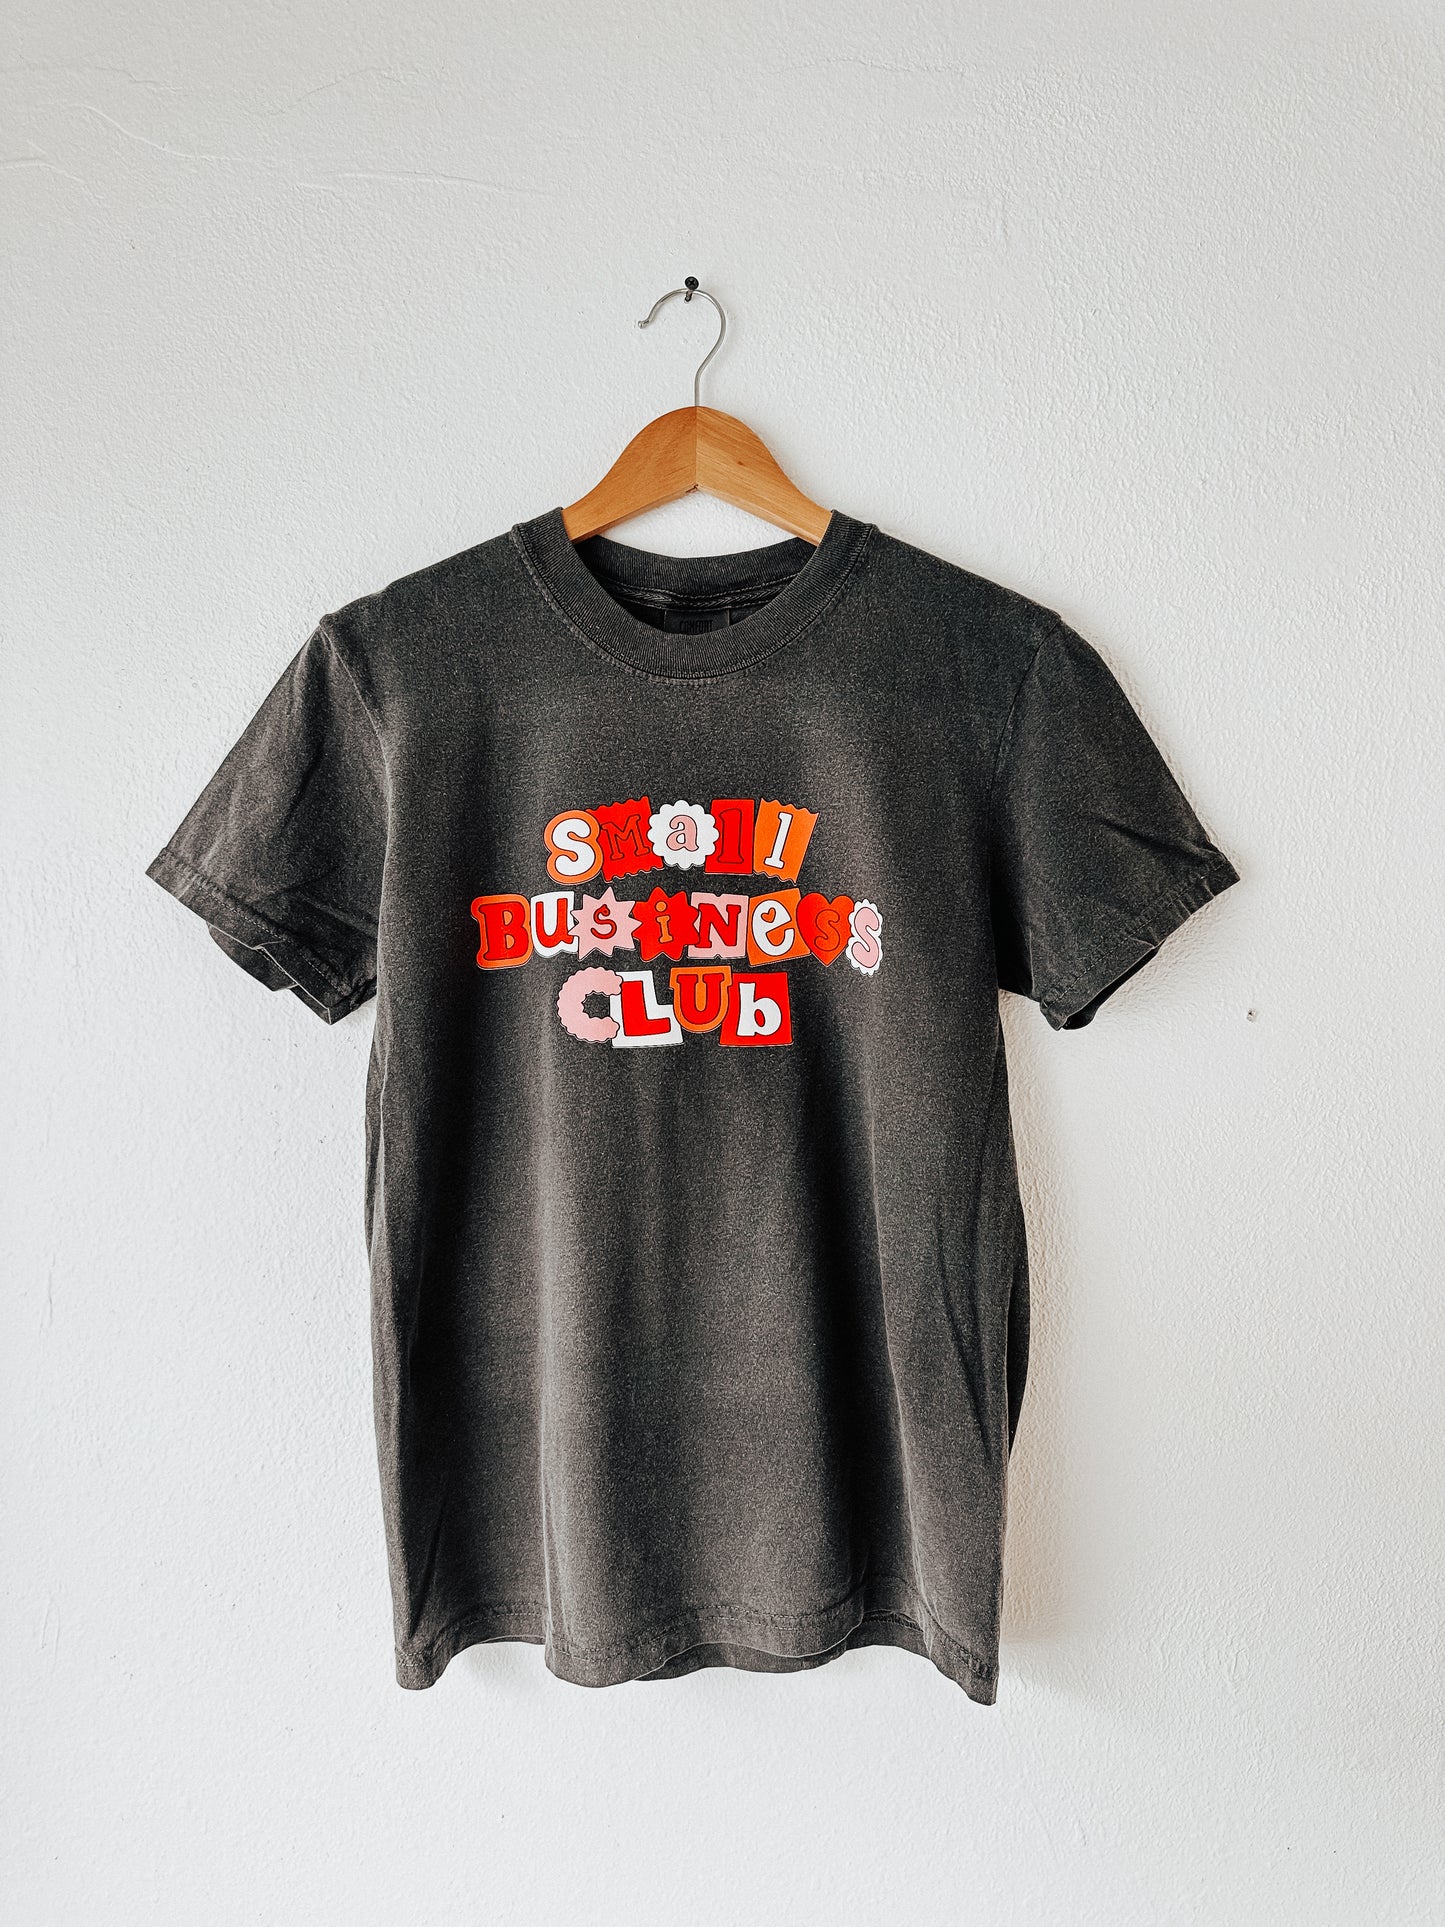 Small Business Club Graphic Tee